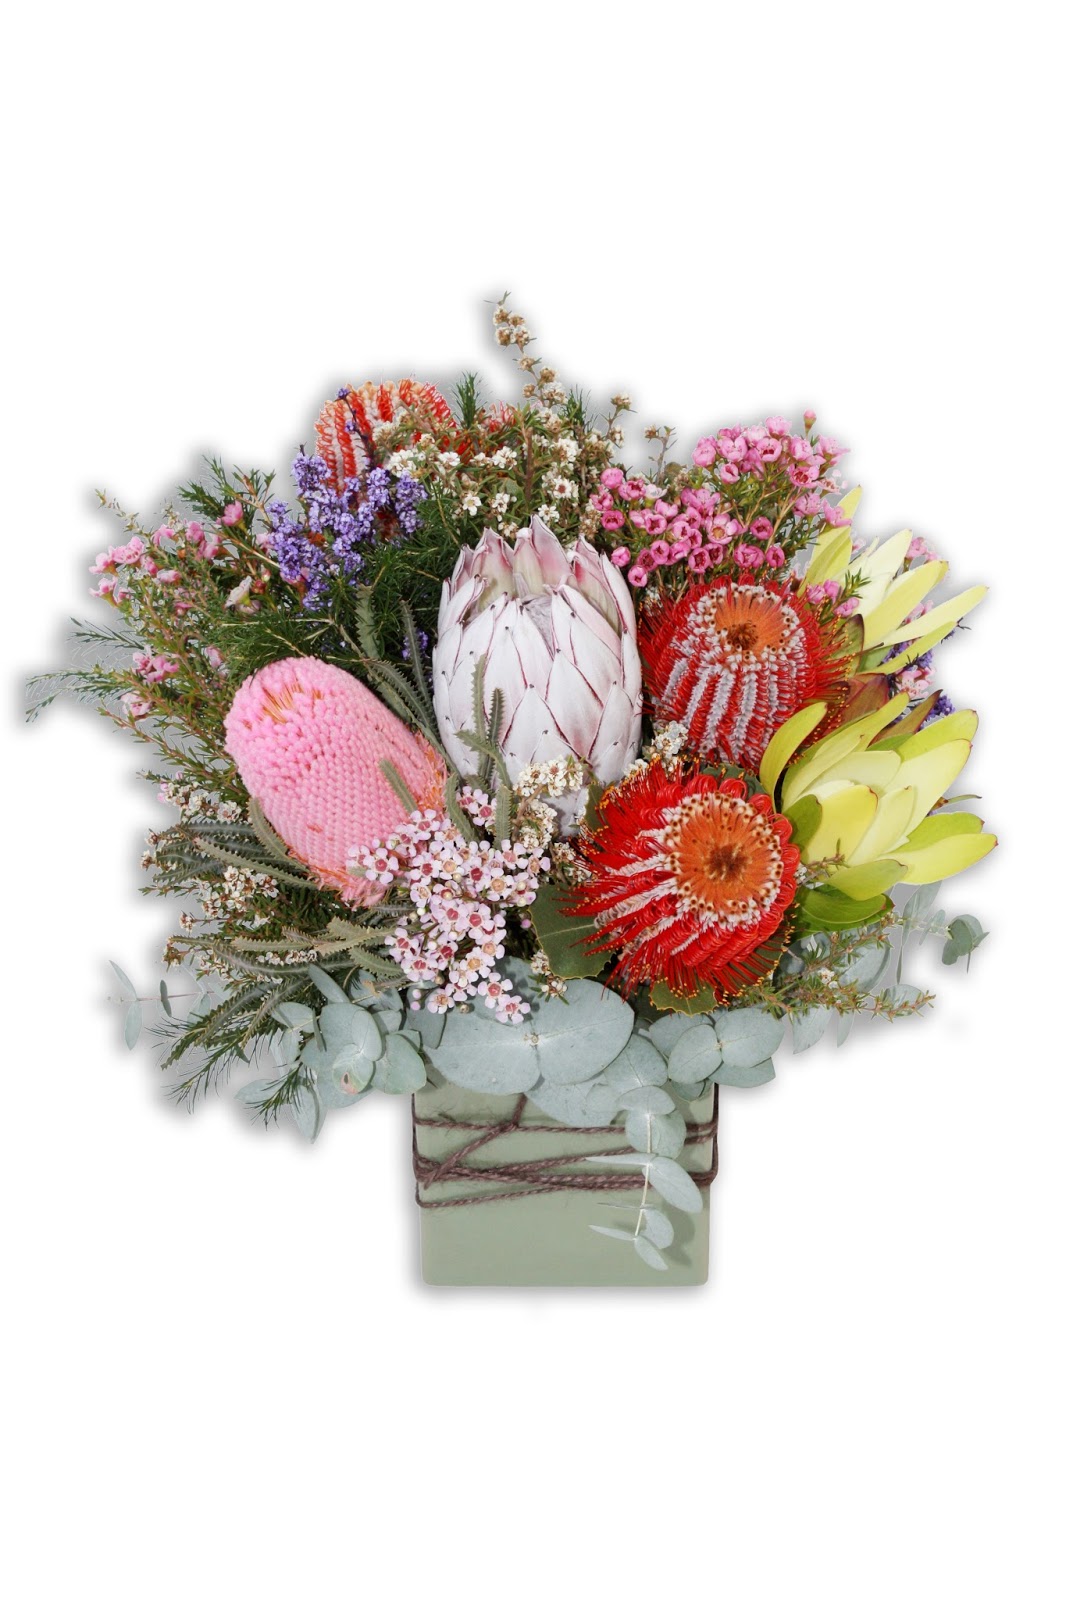 st anne's florist and gift baskets perth: native flowers perth